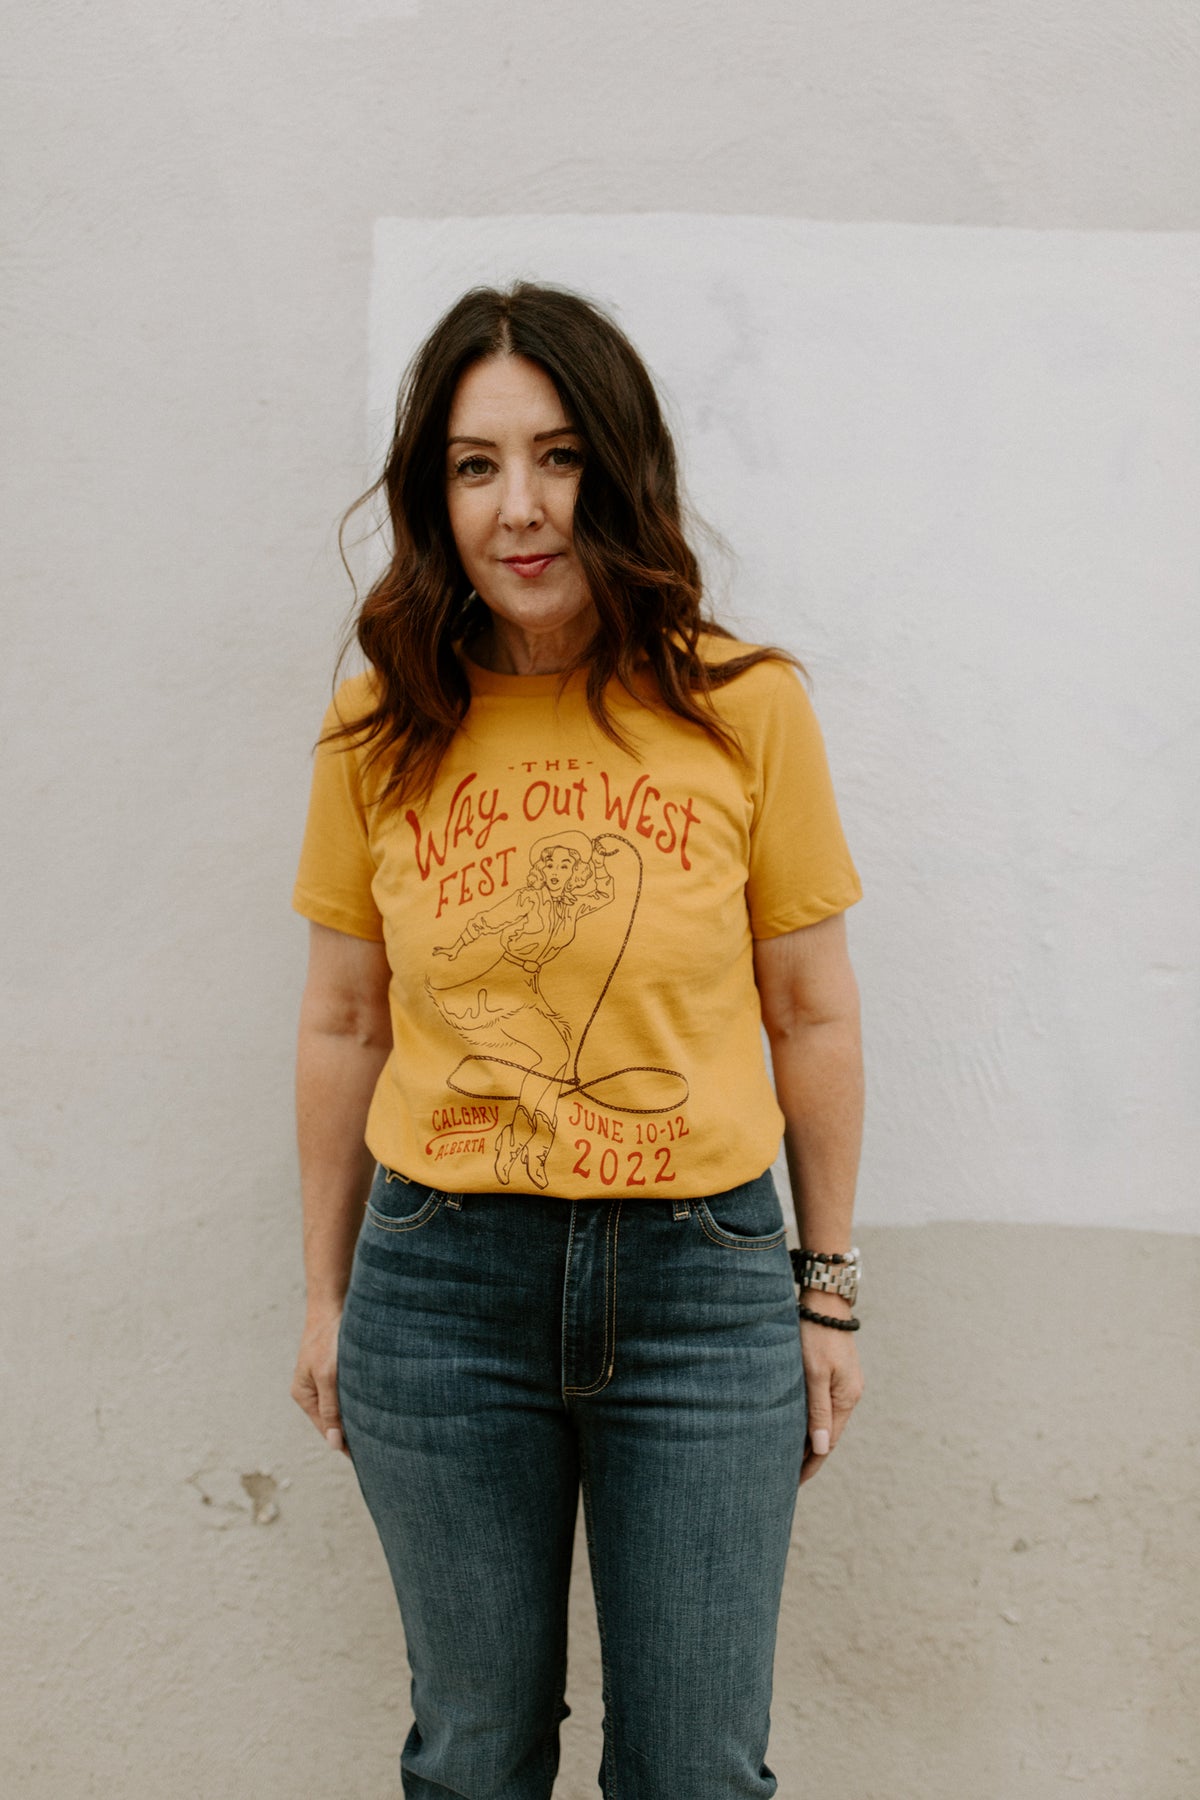 Way Out West Fest Women&#39;s Tee (2022)